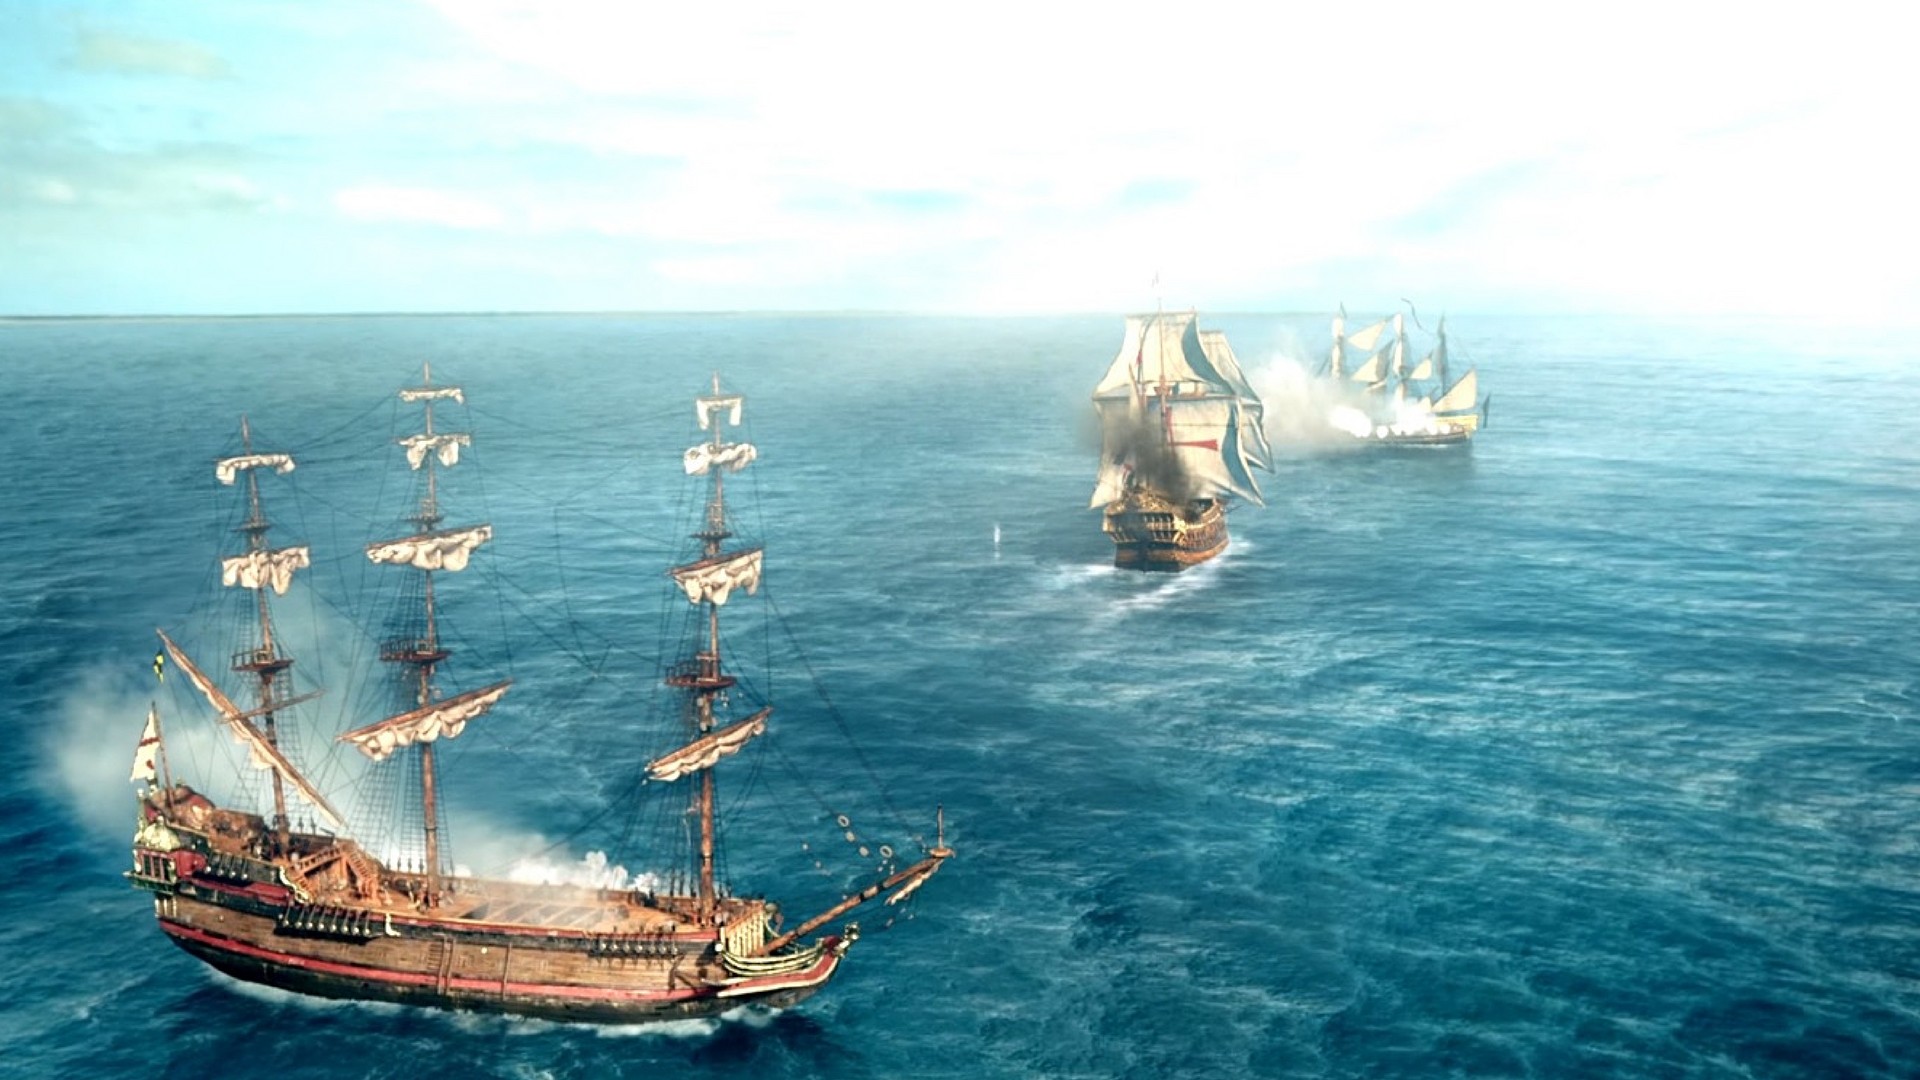 1920x1080 ships in black sails season 4 produced by micheal bay